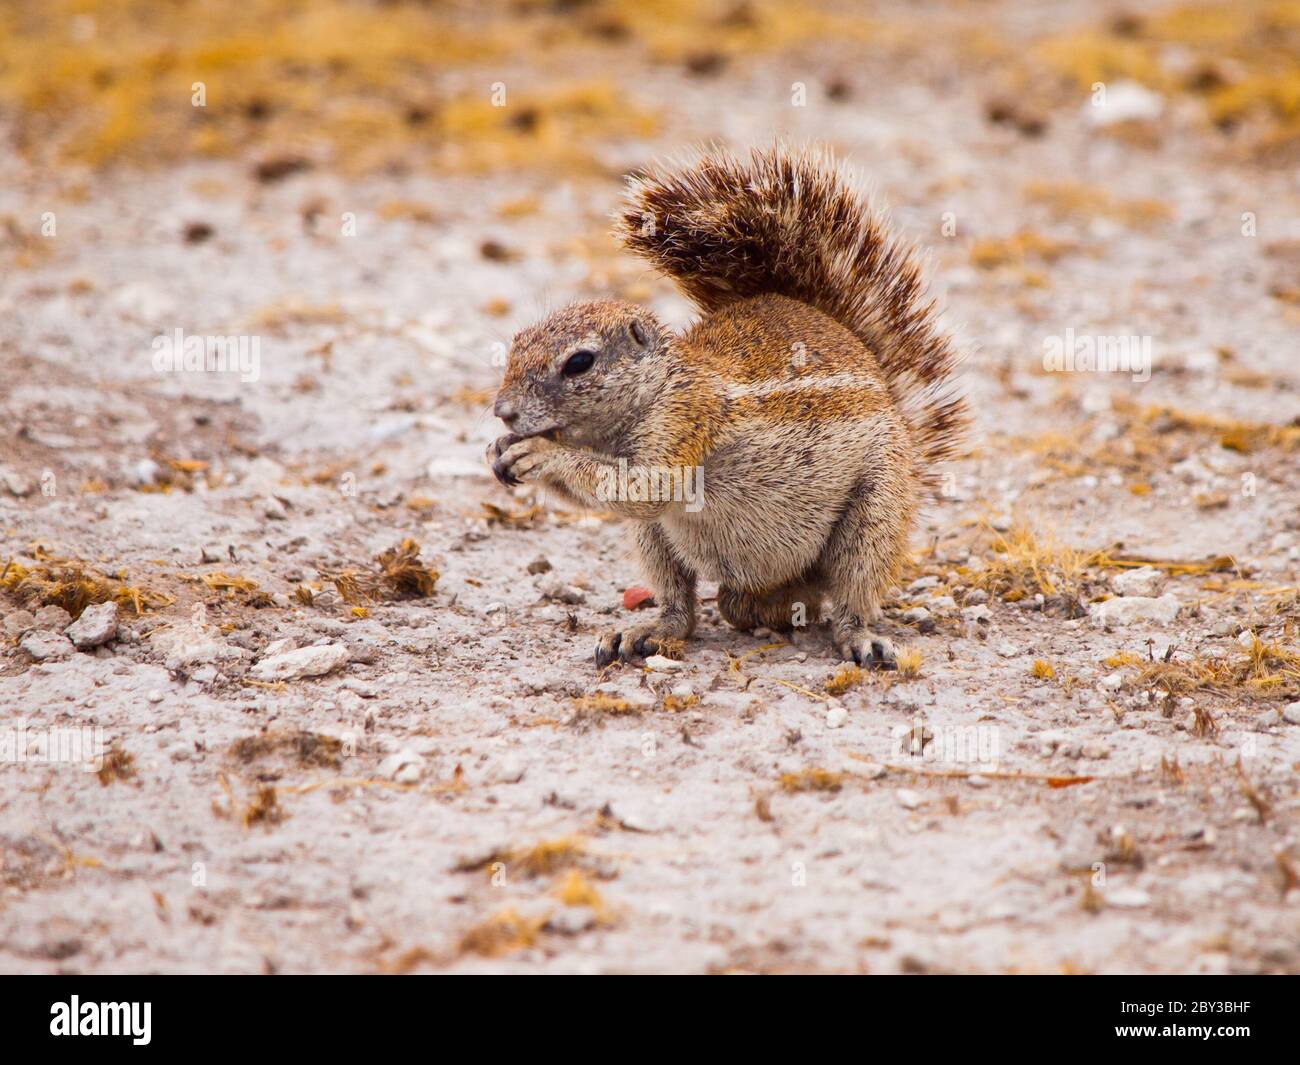 South African ground squirrel, Xerus inauris, sitting and eating, Etosha National Park, Namibia. Stock Photo